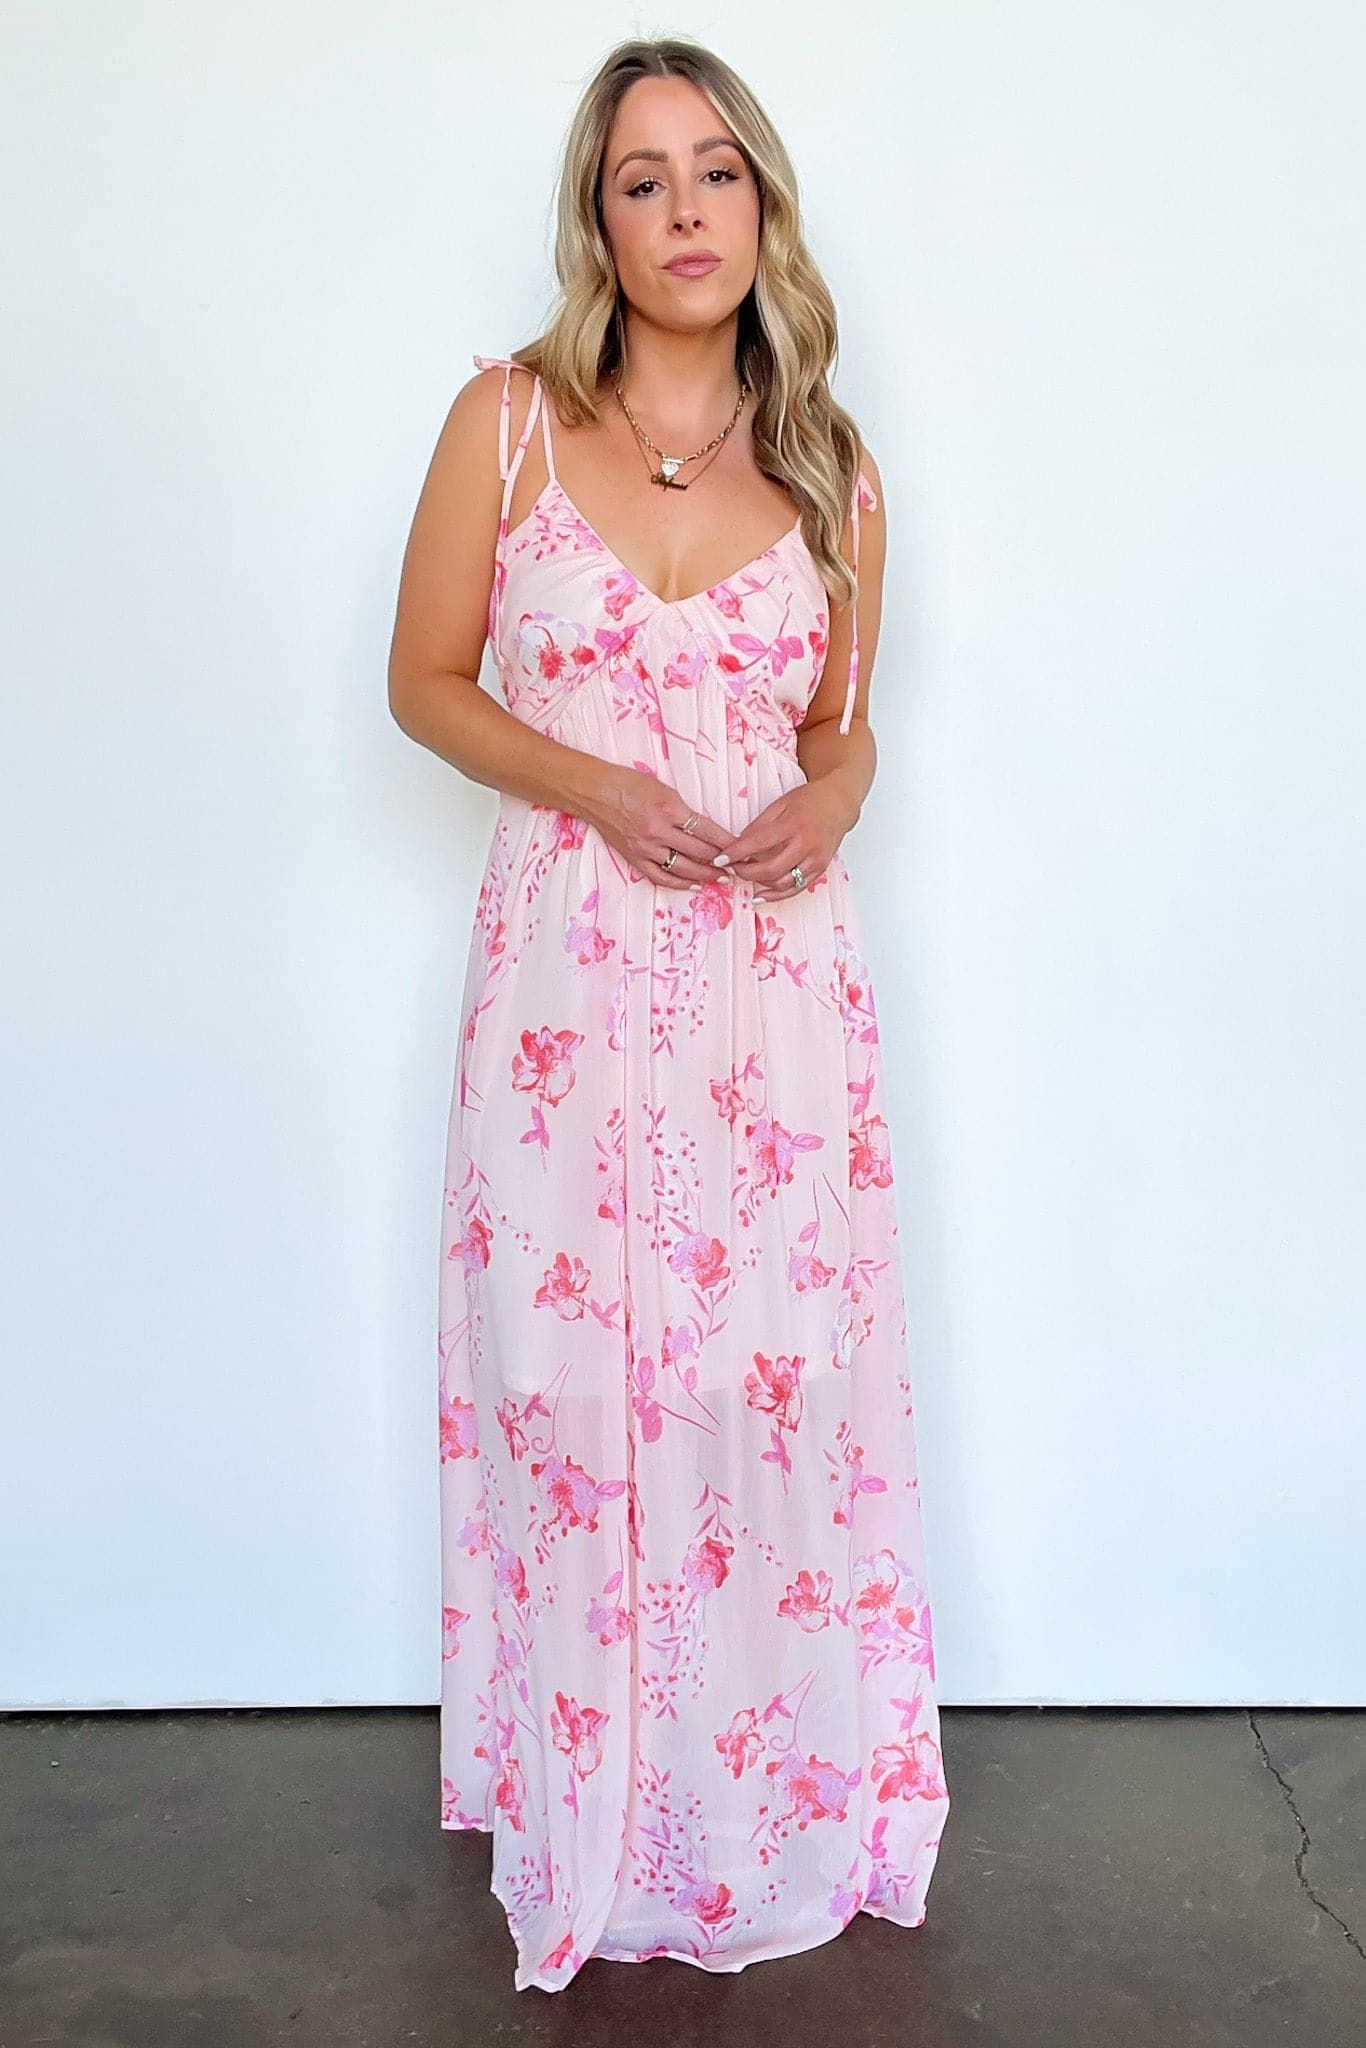  Cascading Crush Floral Maxi Dress - FINAL SALE - Madison and Mallory